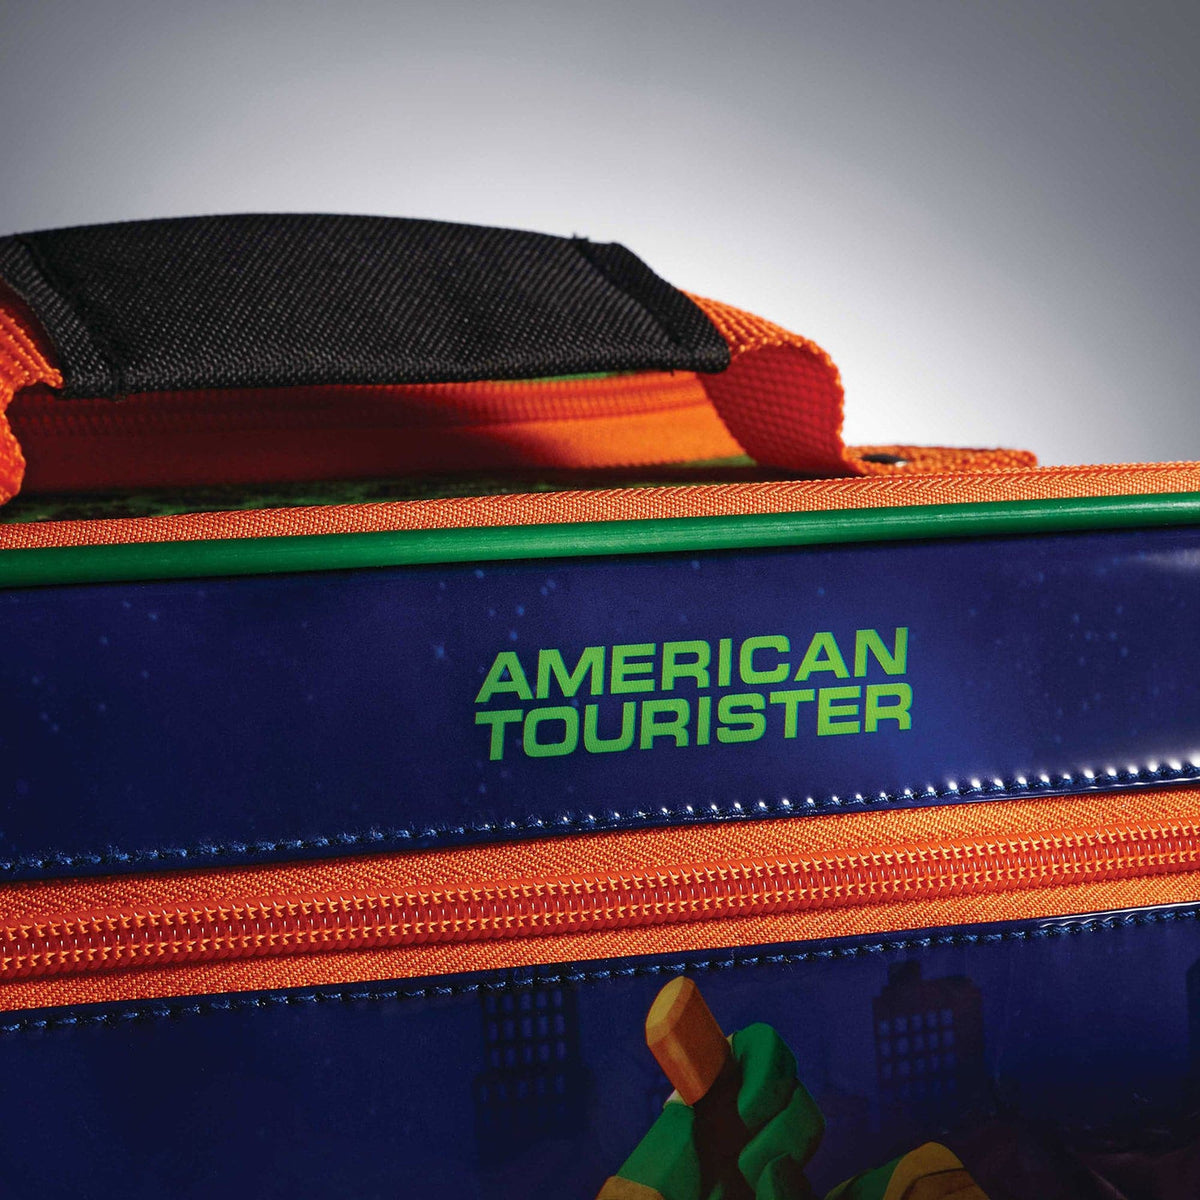 American Tourister Nickelodeon 18" Carry-On Luggage 89742